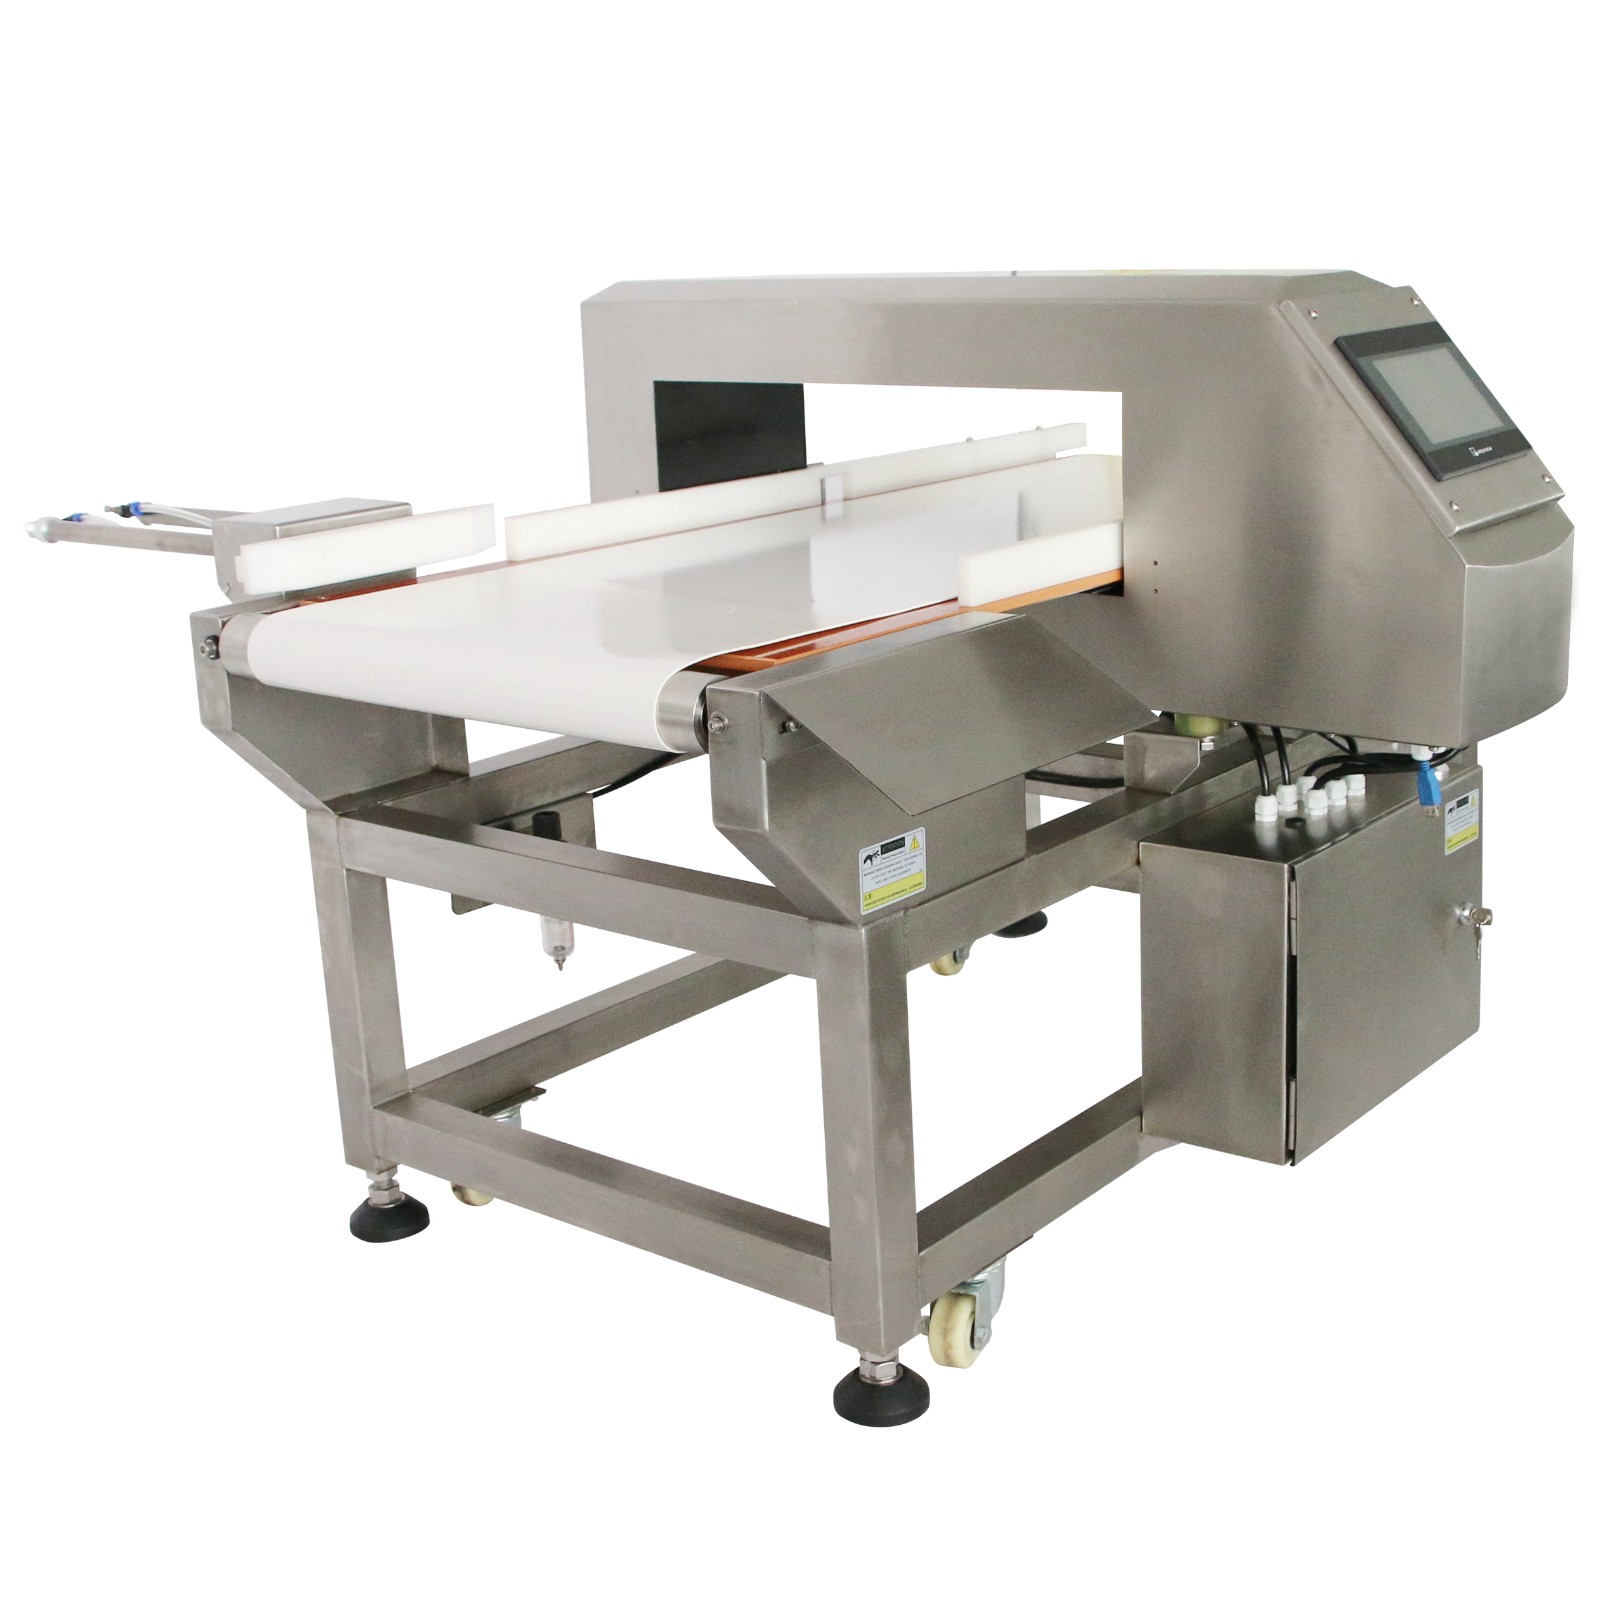 60*10 size Metal Detector Machine for Garment Industry